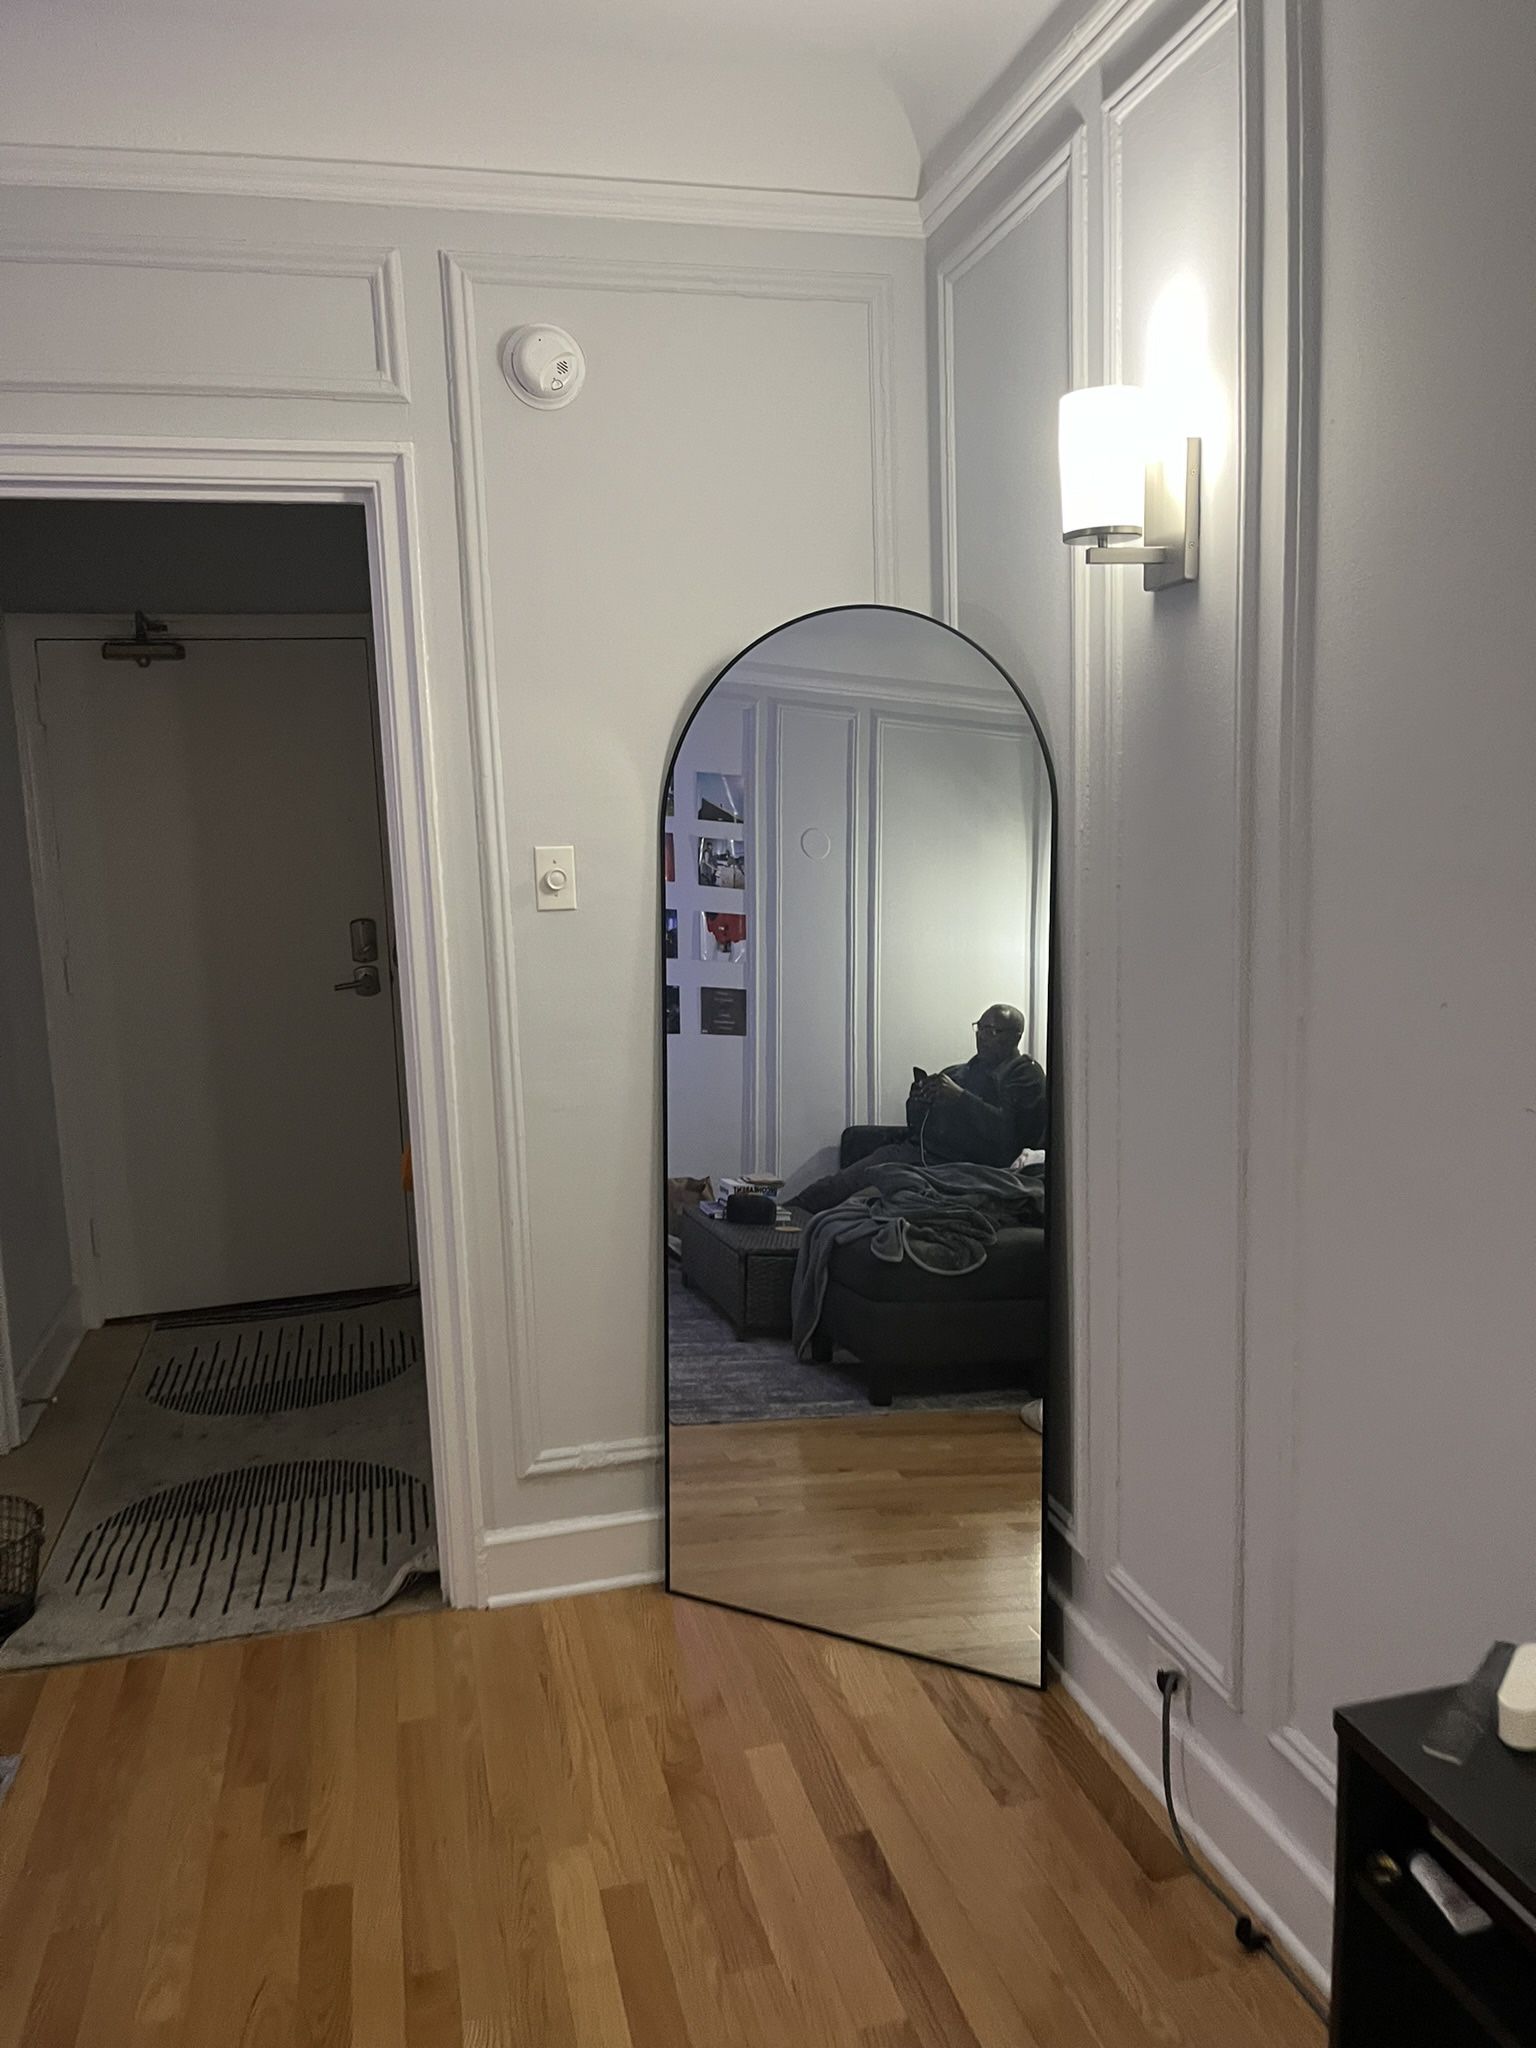 Standing mirror can be mounted as well